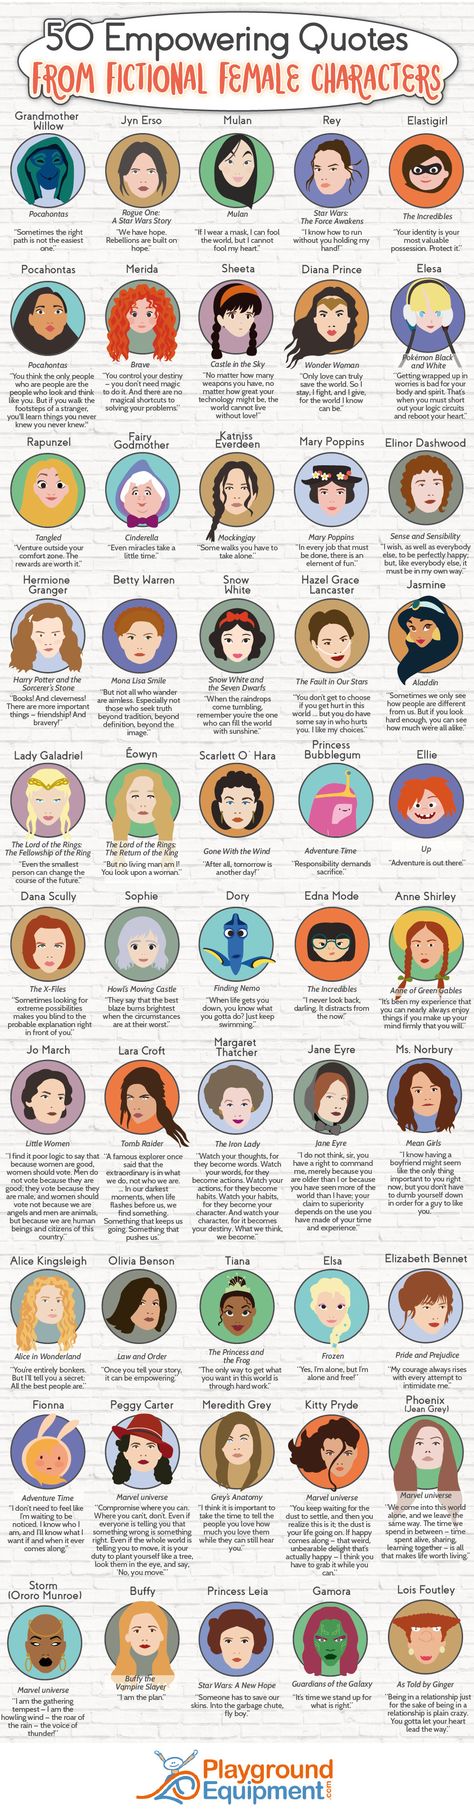 50 Empowering Quotes from Fictional Female Characters Infographic is Everything You Ever Wanted Character Quotes, Fictional Character Wallpaper, Fictional Female Characters, Tatabahasa Inggeris, Prințese Disney, Kraf Diy, Motiverende Quotes, Quotes Disney, Super Quotes